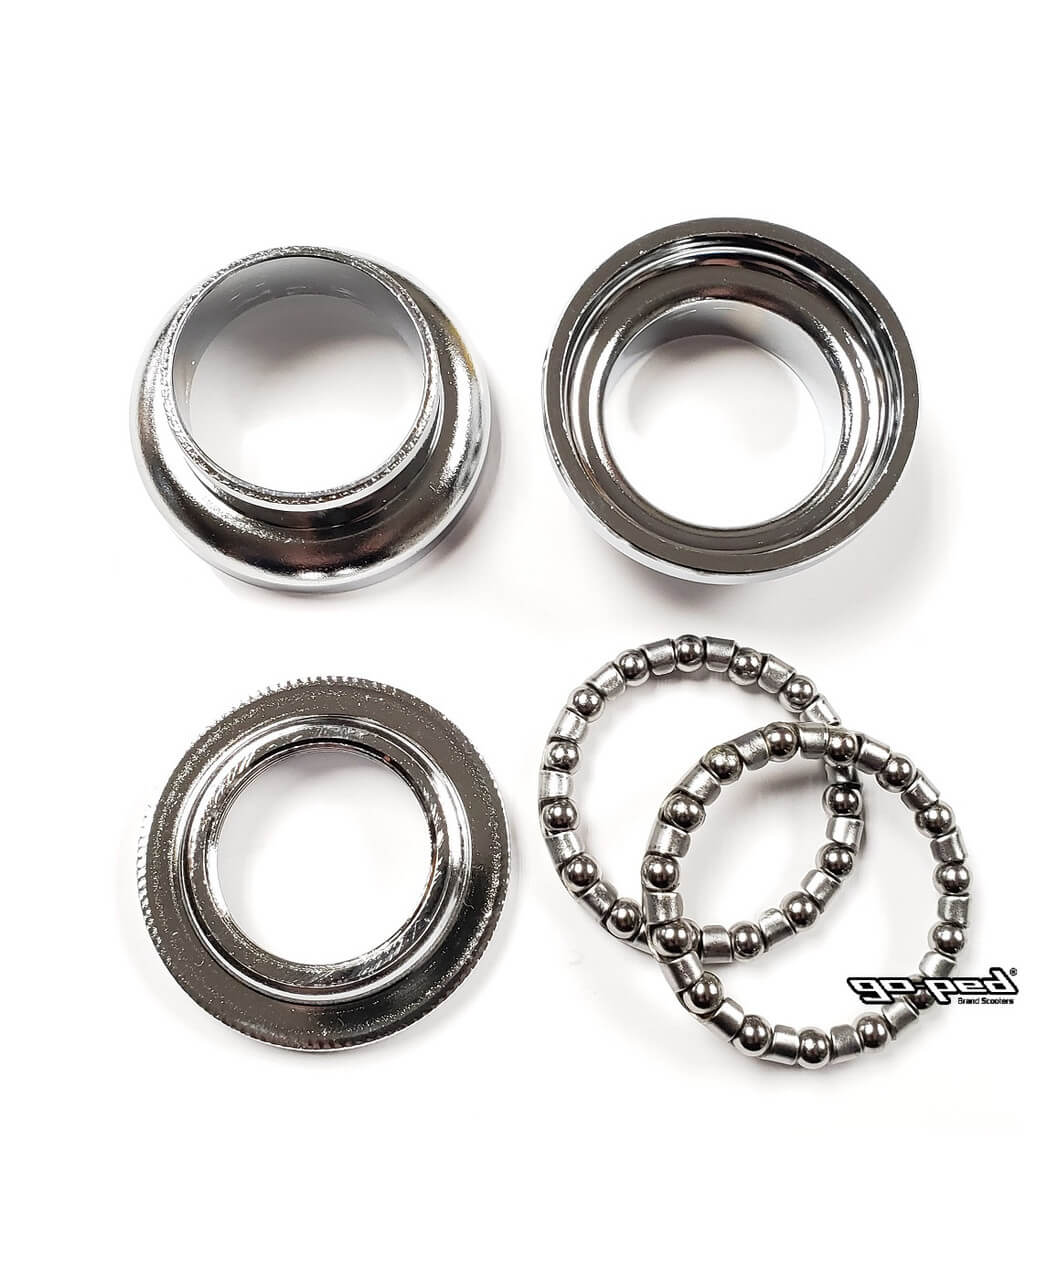 Go-Ped Replacement 1-9/16" STEERING HEAD REBUILD KIT (400117) for Scooters